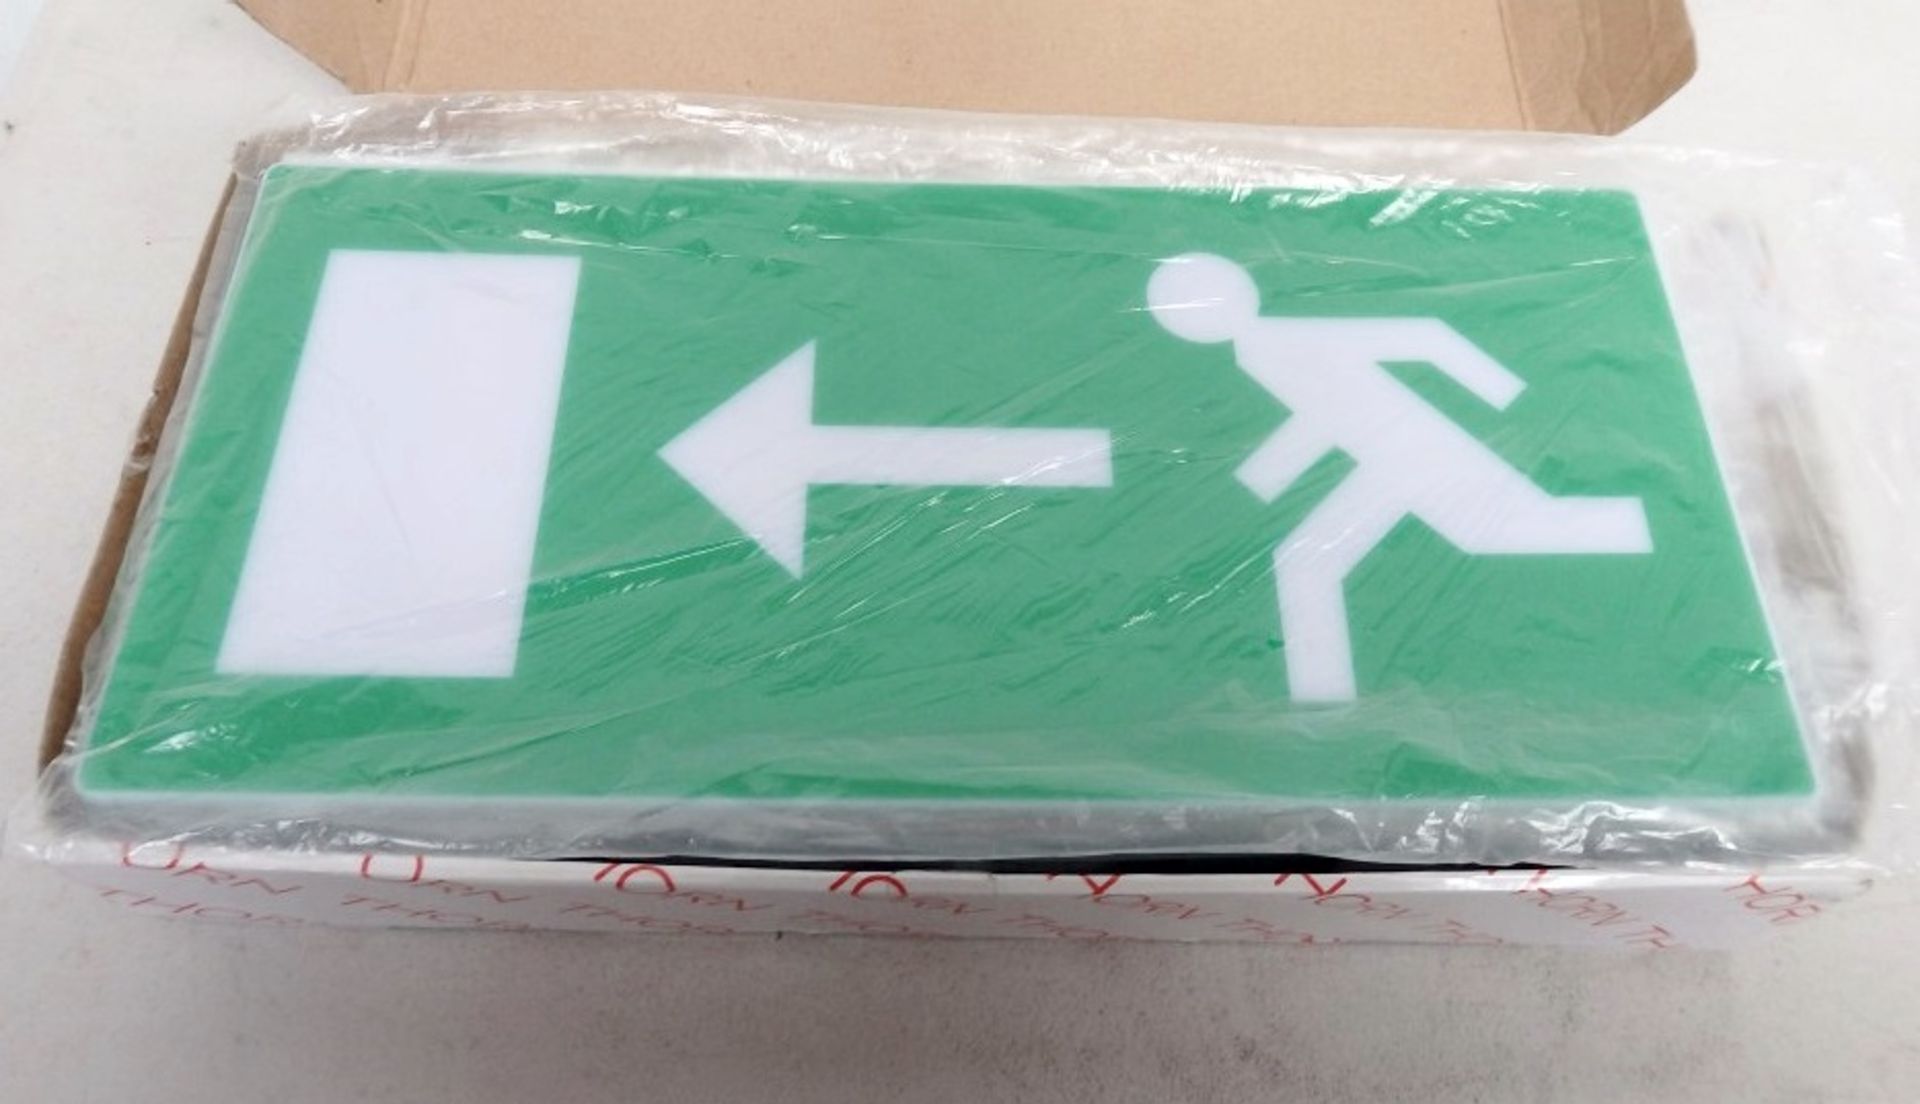 1 x THORN Voyager E Exit Sign - Model E3m - CL150 - Unused, Boxed Stock - Ref: HOT072 - Location: - Image 8 of 10